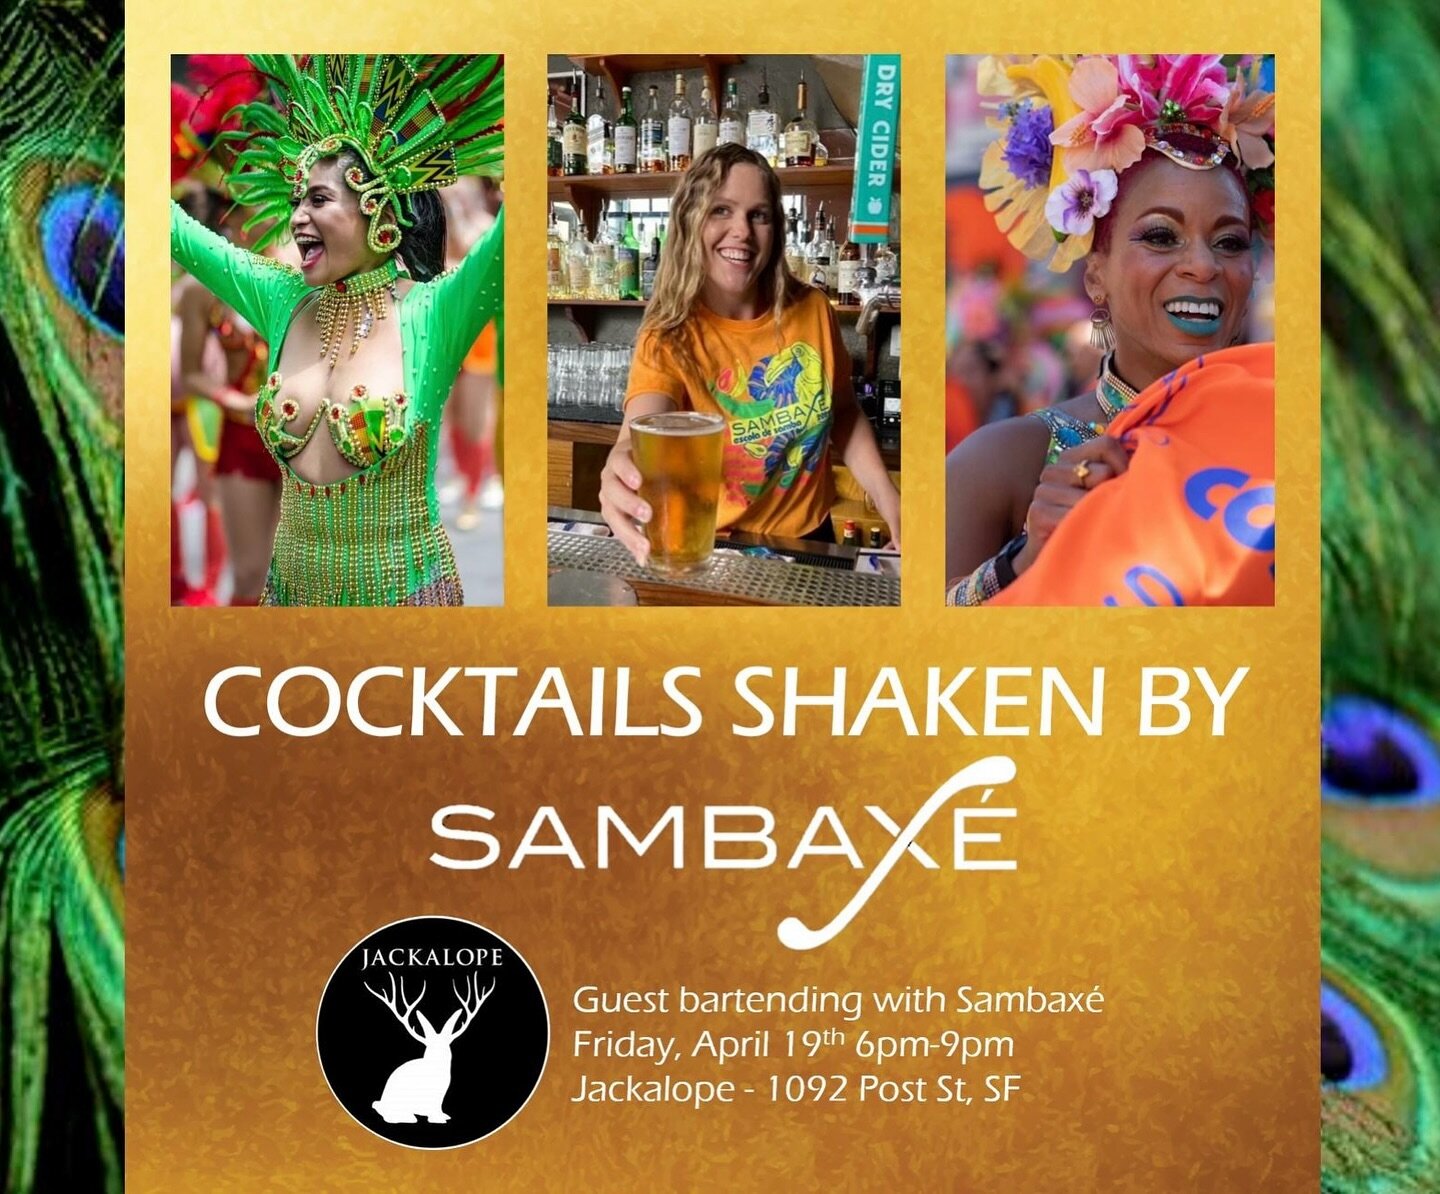 Let&rsquo;s shake it up! ✨
.
Meet us at @jackalopebarsf Friday, April 19 6-9pm
.
We fundraise not only for the sound system rental, but also to subsidize #CarnavalSF participation cost for dancers in our Sambax&eacute; familia. It takes a village! 
.